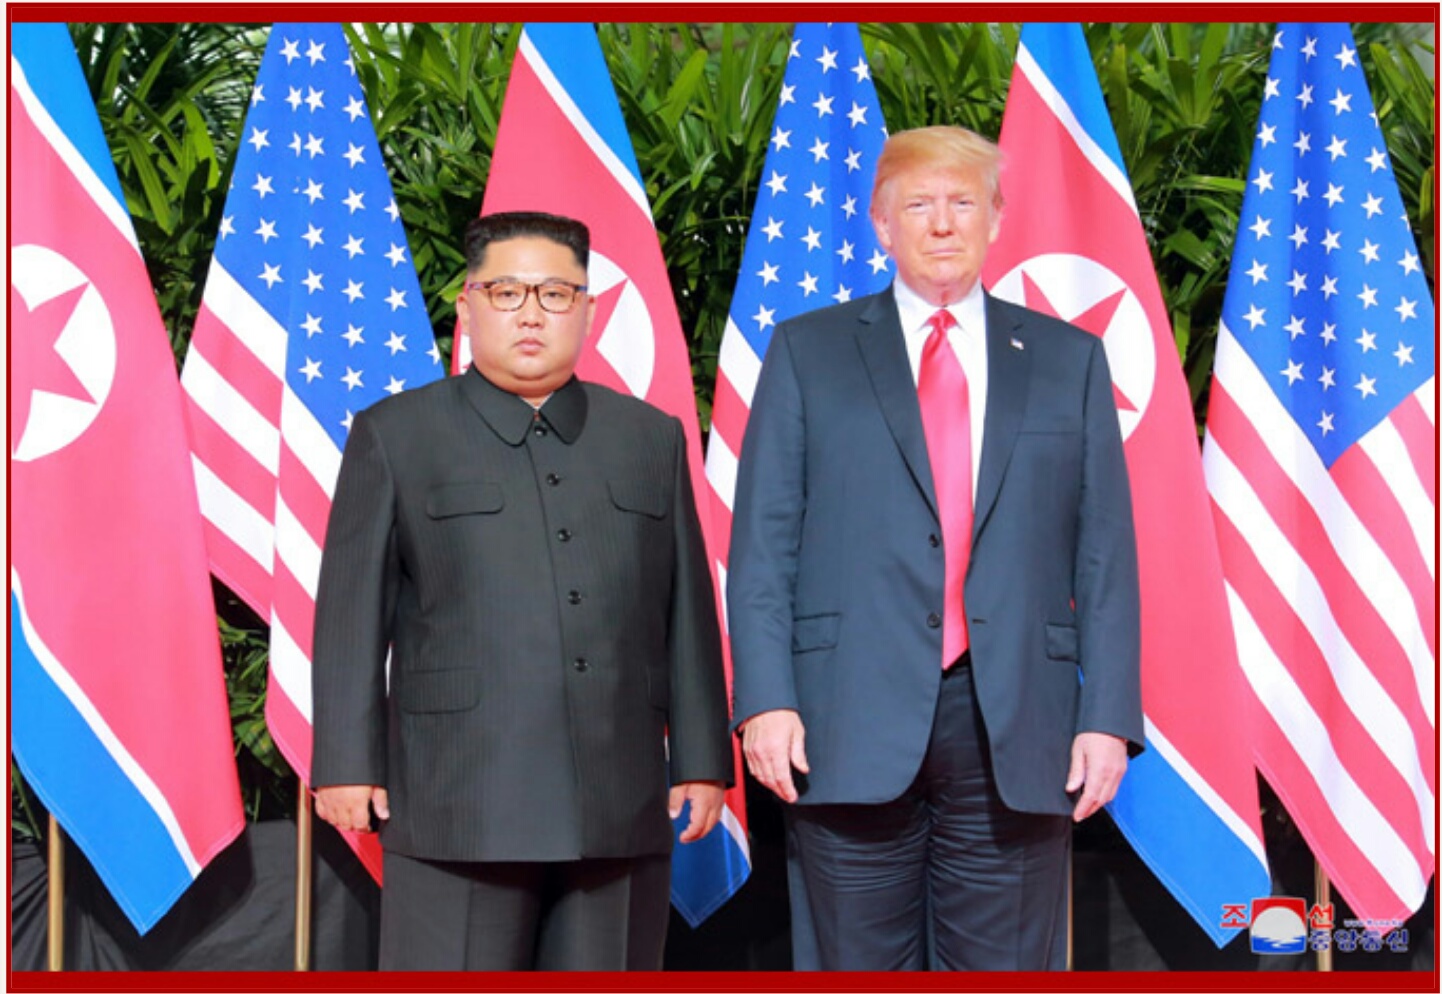 Historic First DPRK-U.S. Summit Meeting and Talks Held - Image